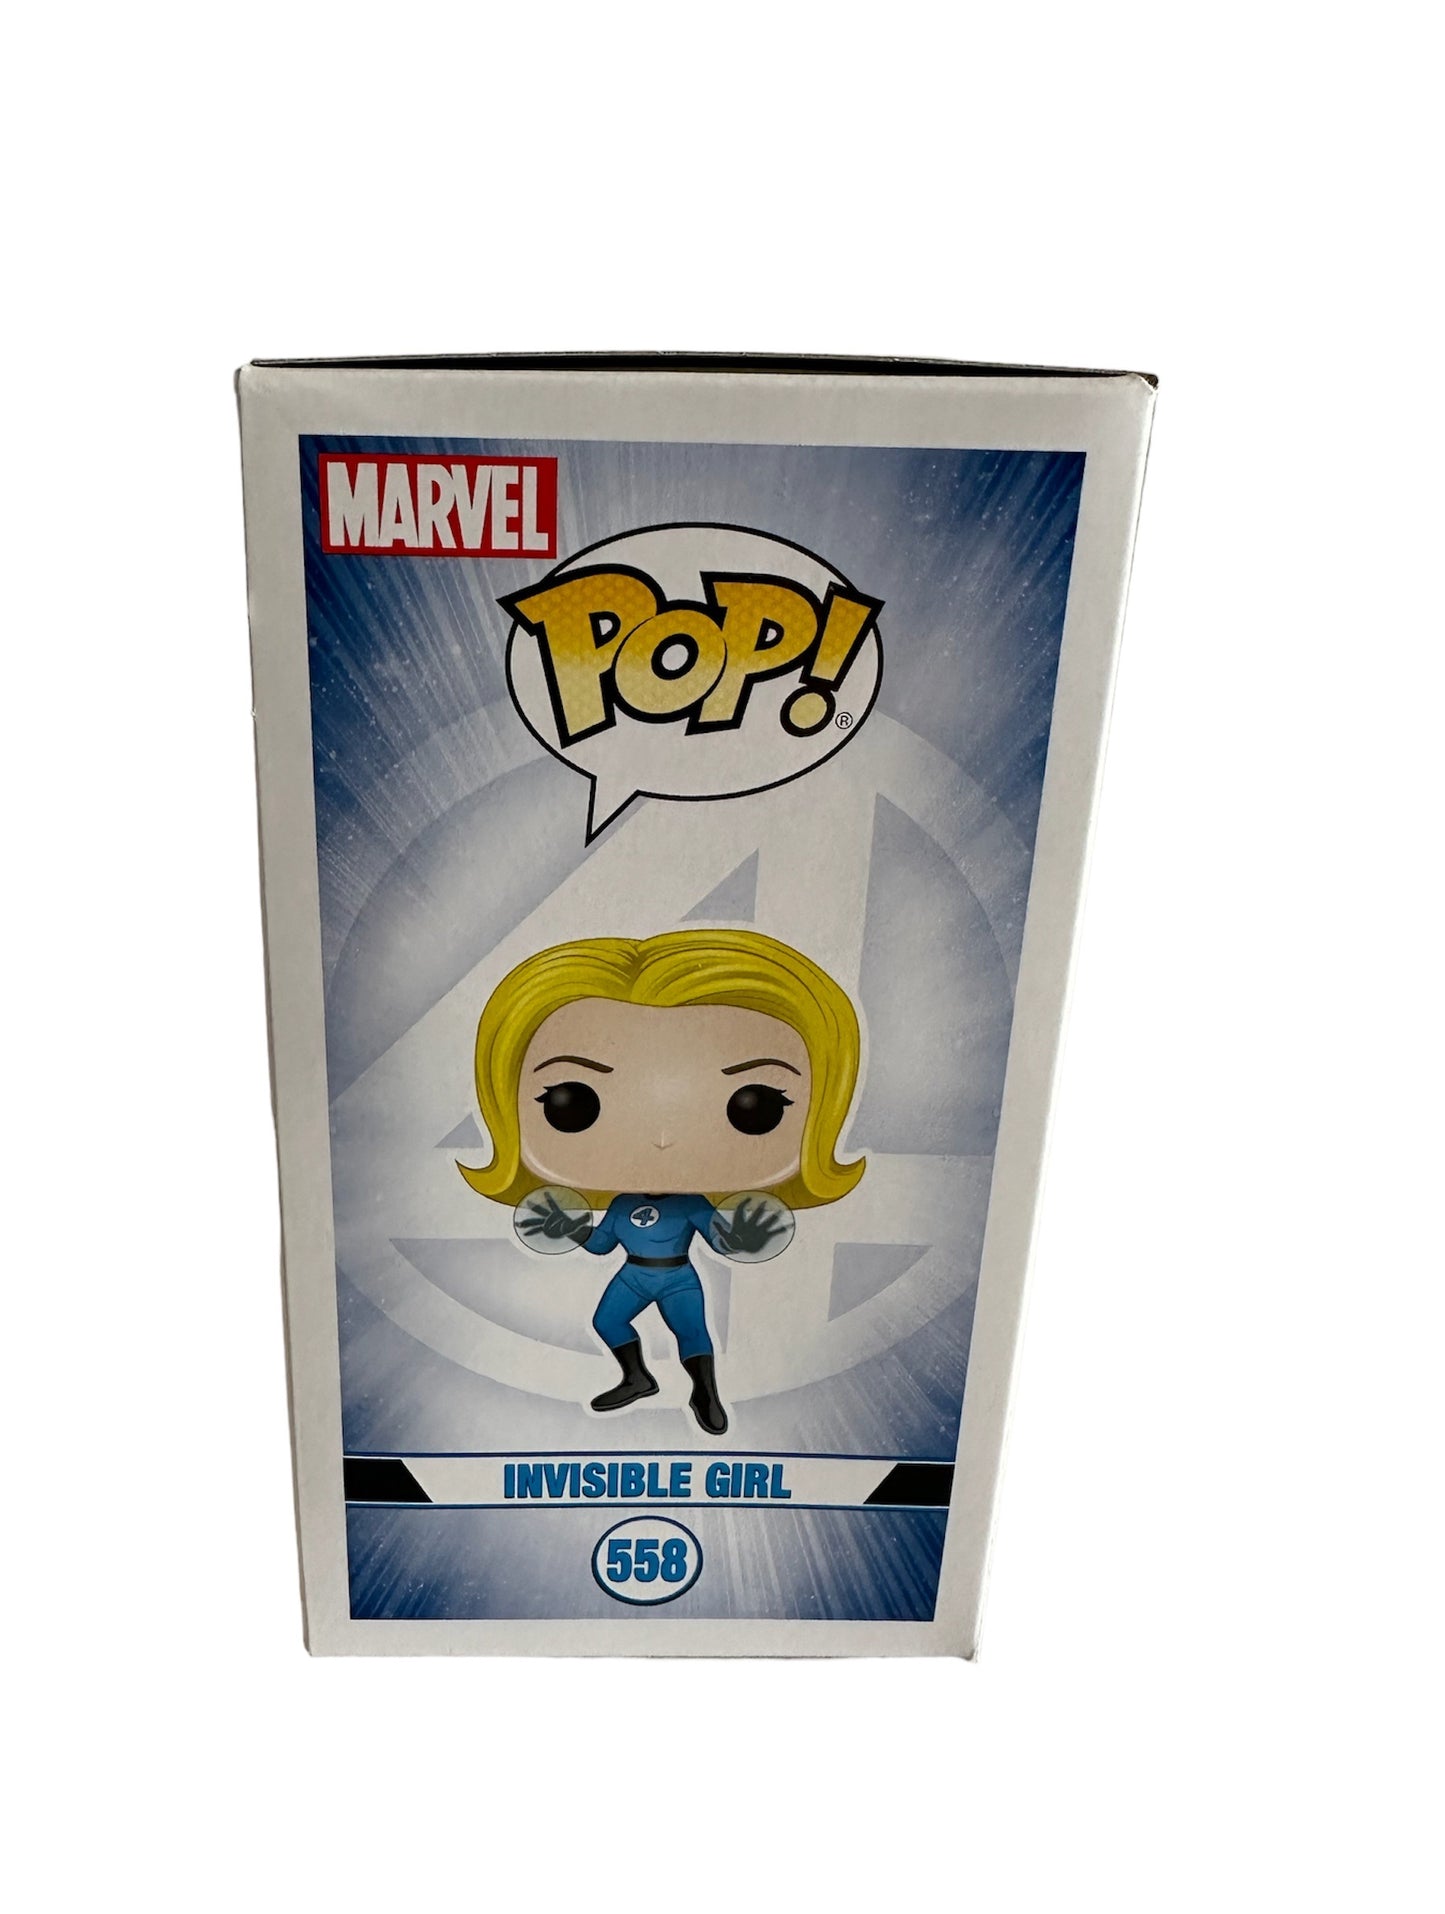 POP! 2019 Marvels The Fantastic Four Pop Vinyl Figure - The Invisible Girl Sue Storm Bobble-Head No. 558 - Brand New Shop Stock Room Find